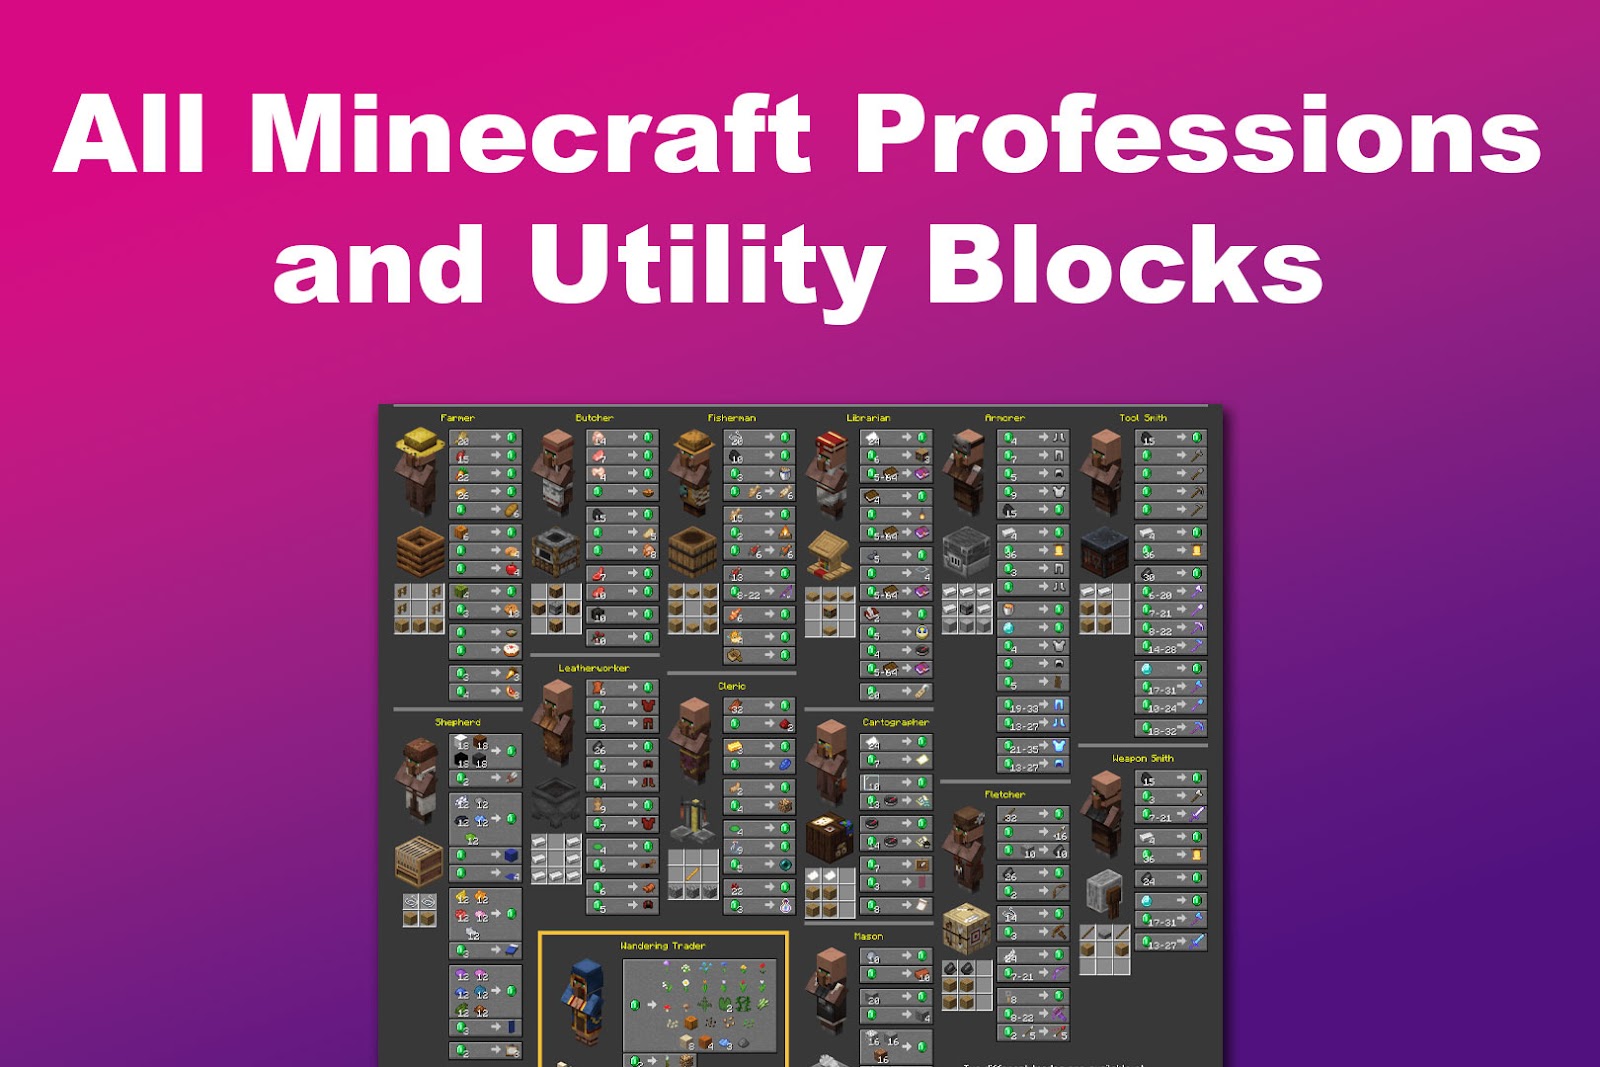 All Minecraft Professions and Utility Blocks